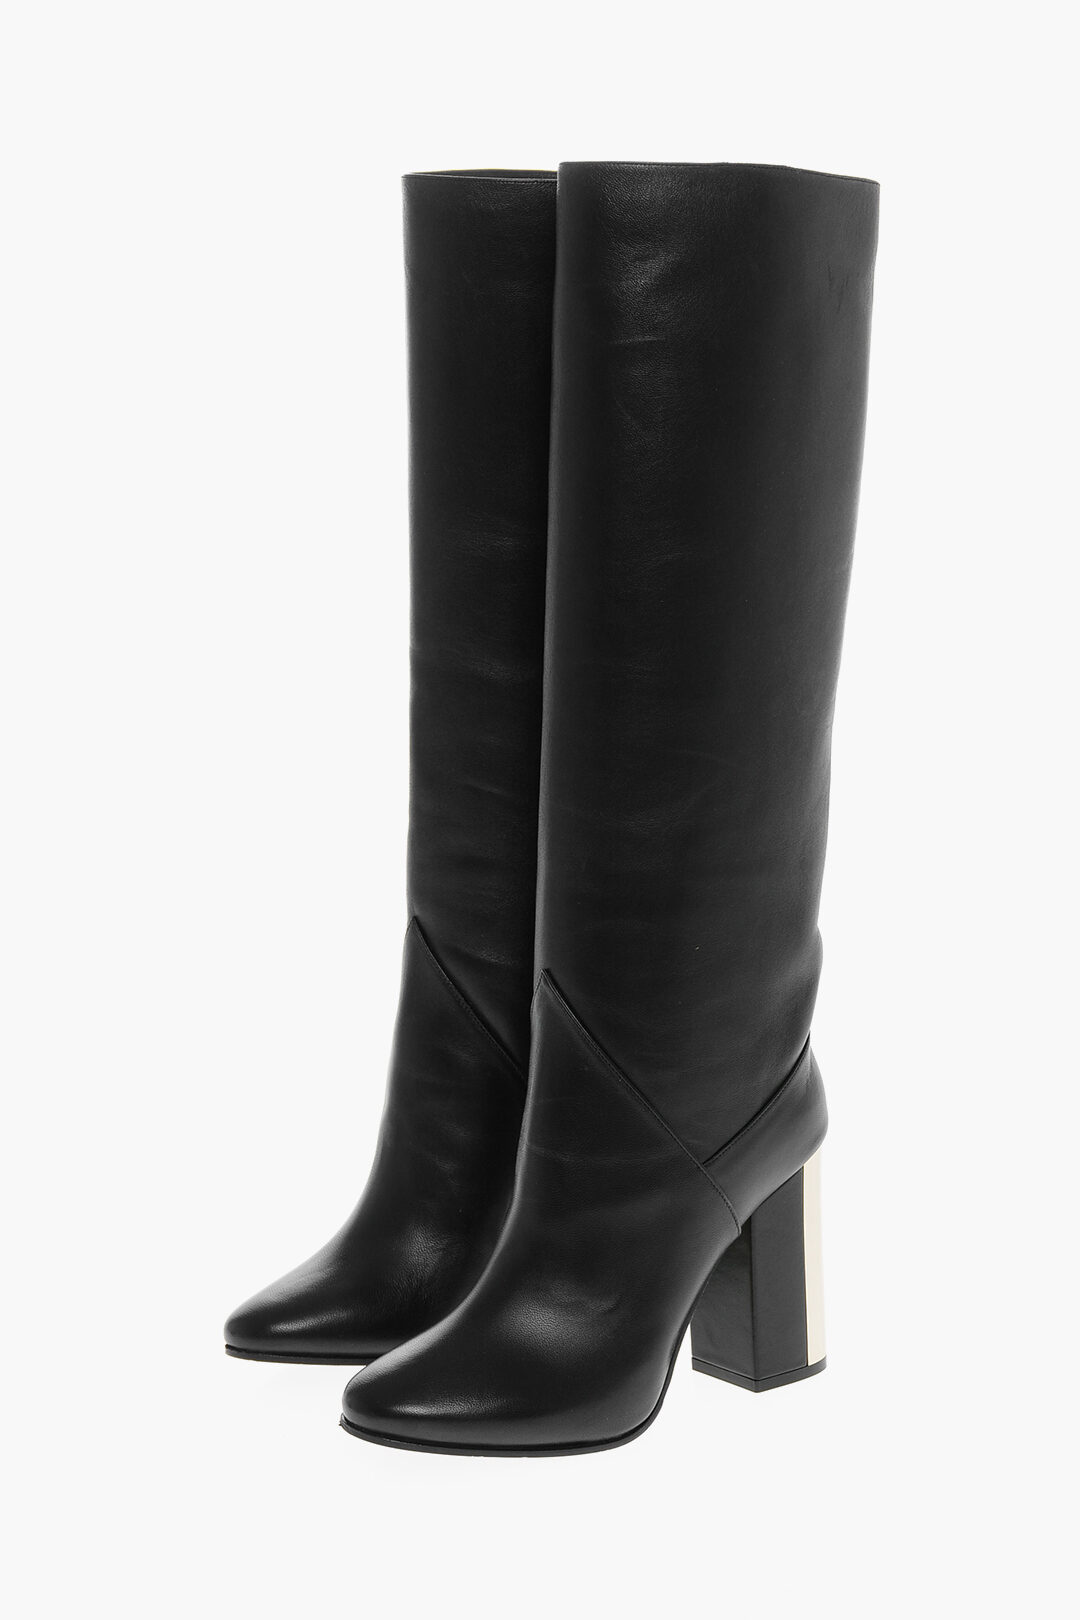 Jimmy Choo Leather Knee High Boots - Size 6.5 / 36.5 (SHF-18128) – LuxeDH